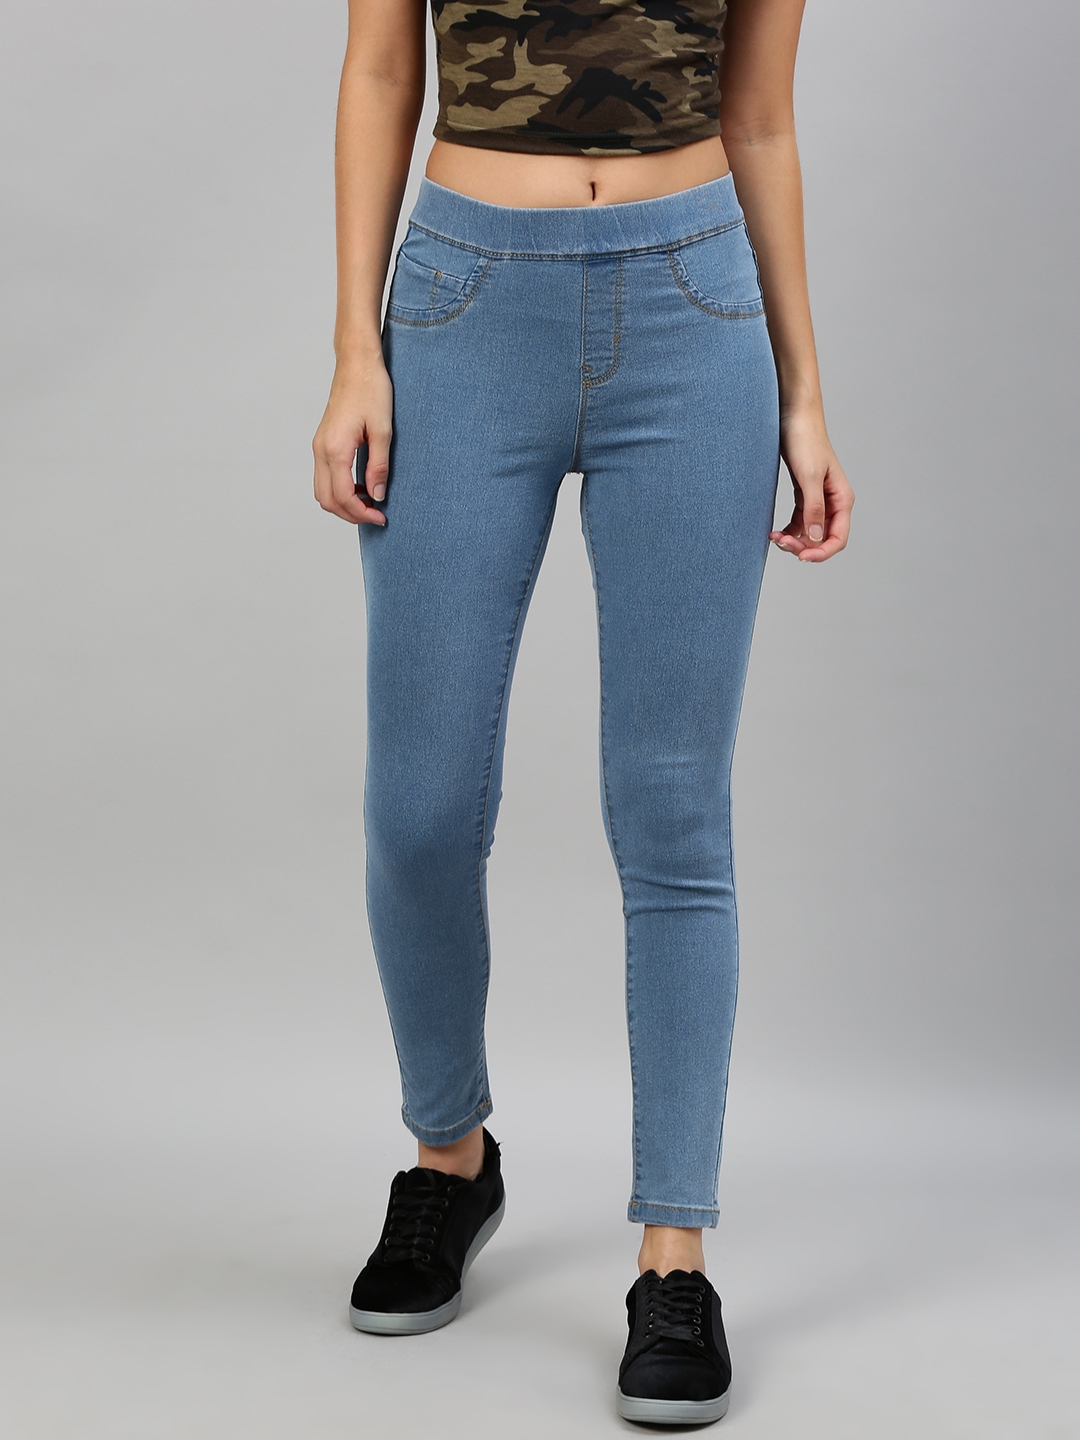 Buy The Roadster Lifestyle Co Women Blue Washed Super Skinny Fit Denim ...